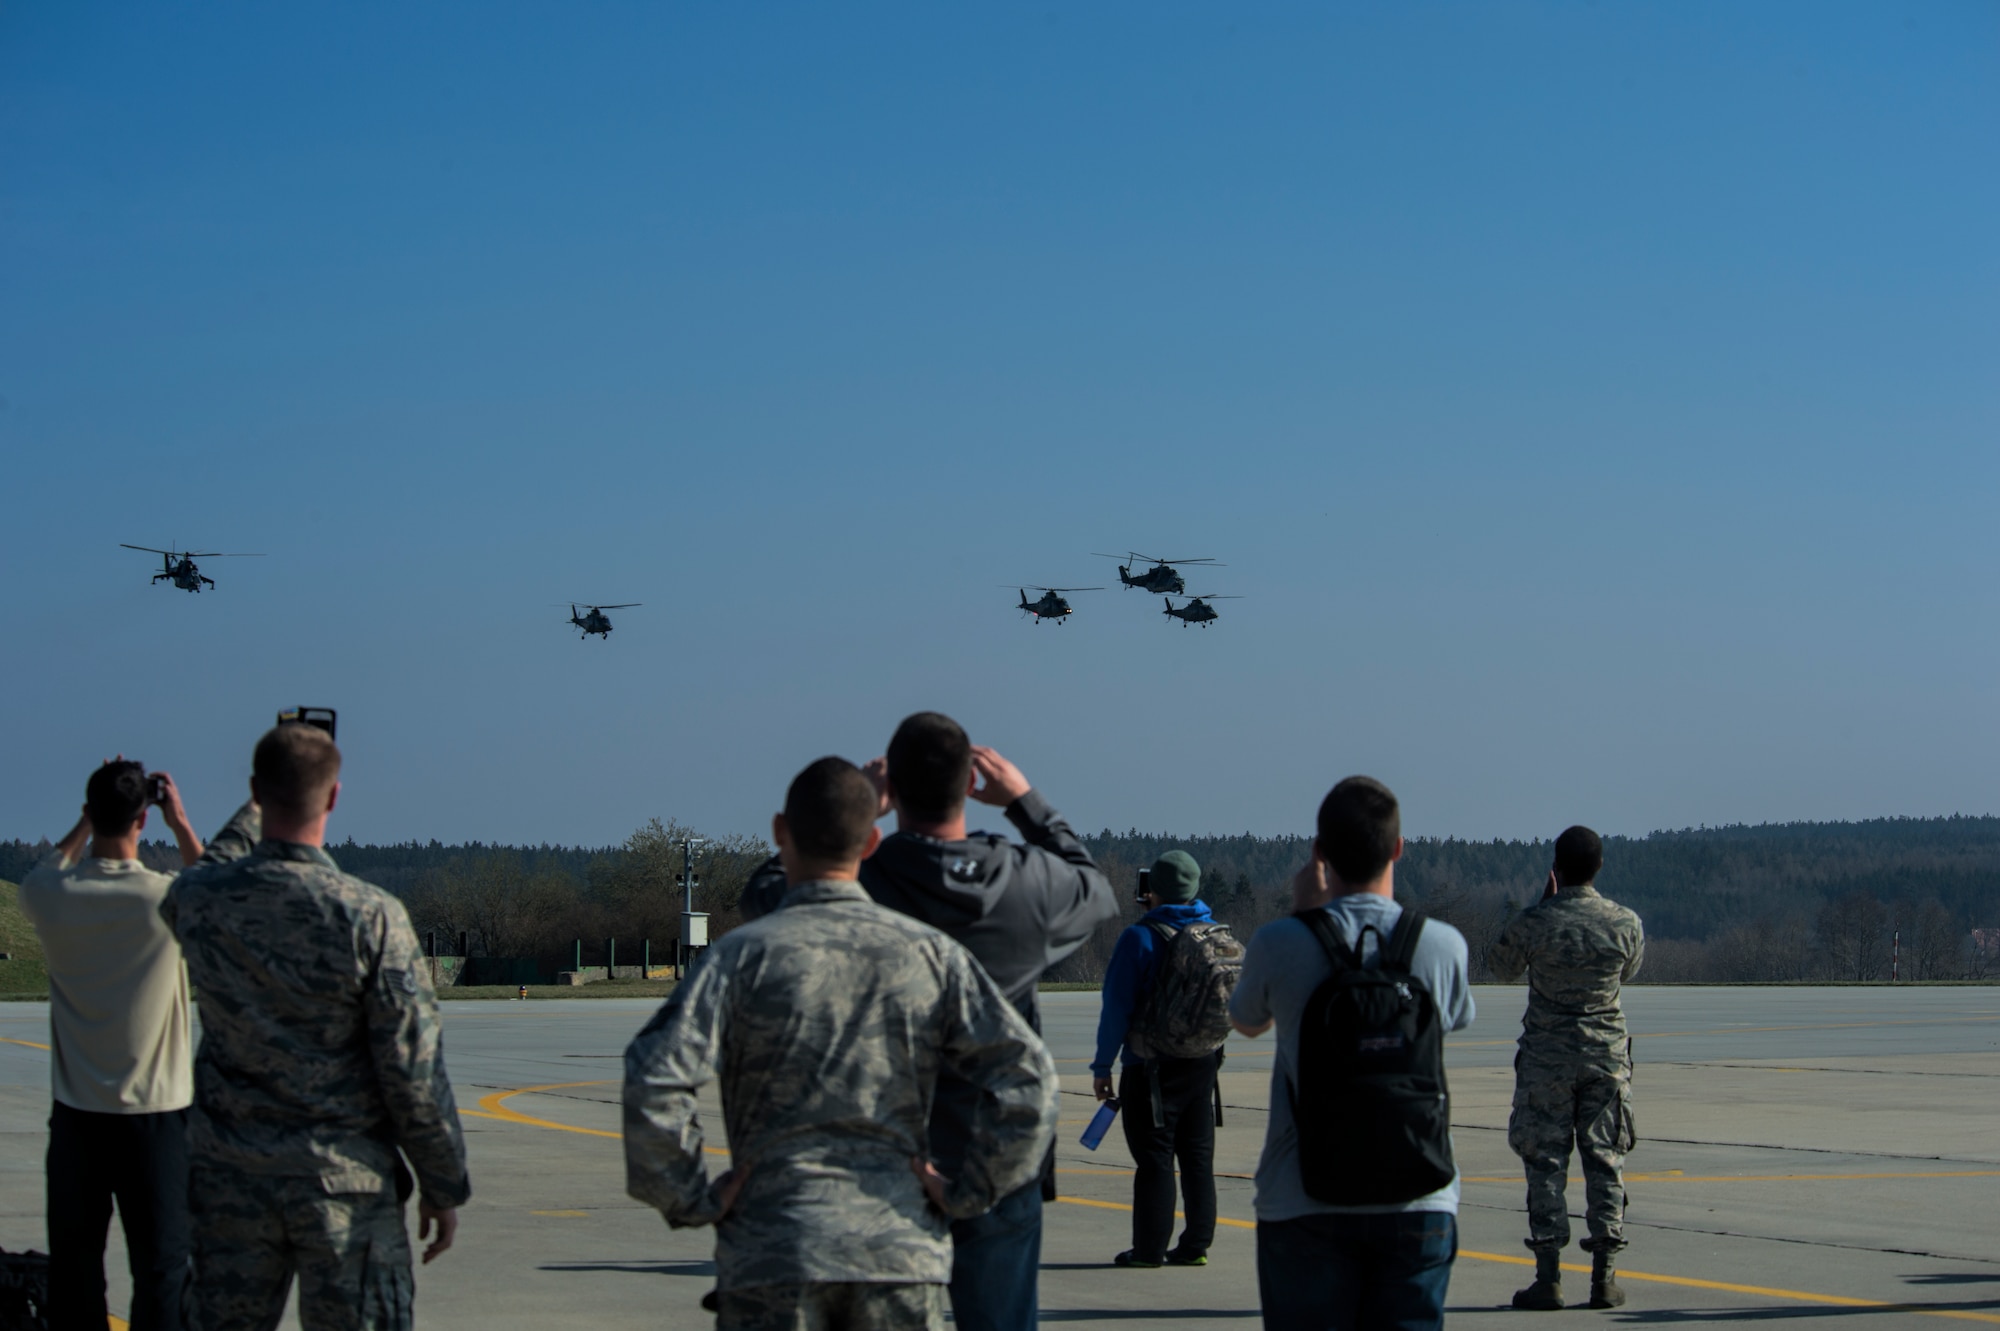 U.S. Air Force Airmen assigned to the 354th Expeditionary fighter Squadron watch as an assortment of Czech Republic air force helicopters fly in formation in a show of force during a theater security package deployment to Namest Air Base, Czech Republic, April 9, 2015. These deployments aim to send a clear message to the international community that the U.S. is serious about security and stability in the region. (U.S. Air Force photo by Staff Sgt. Christopher Ruano/Released)